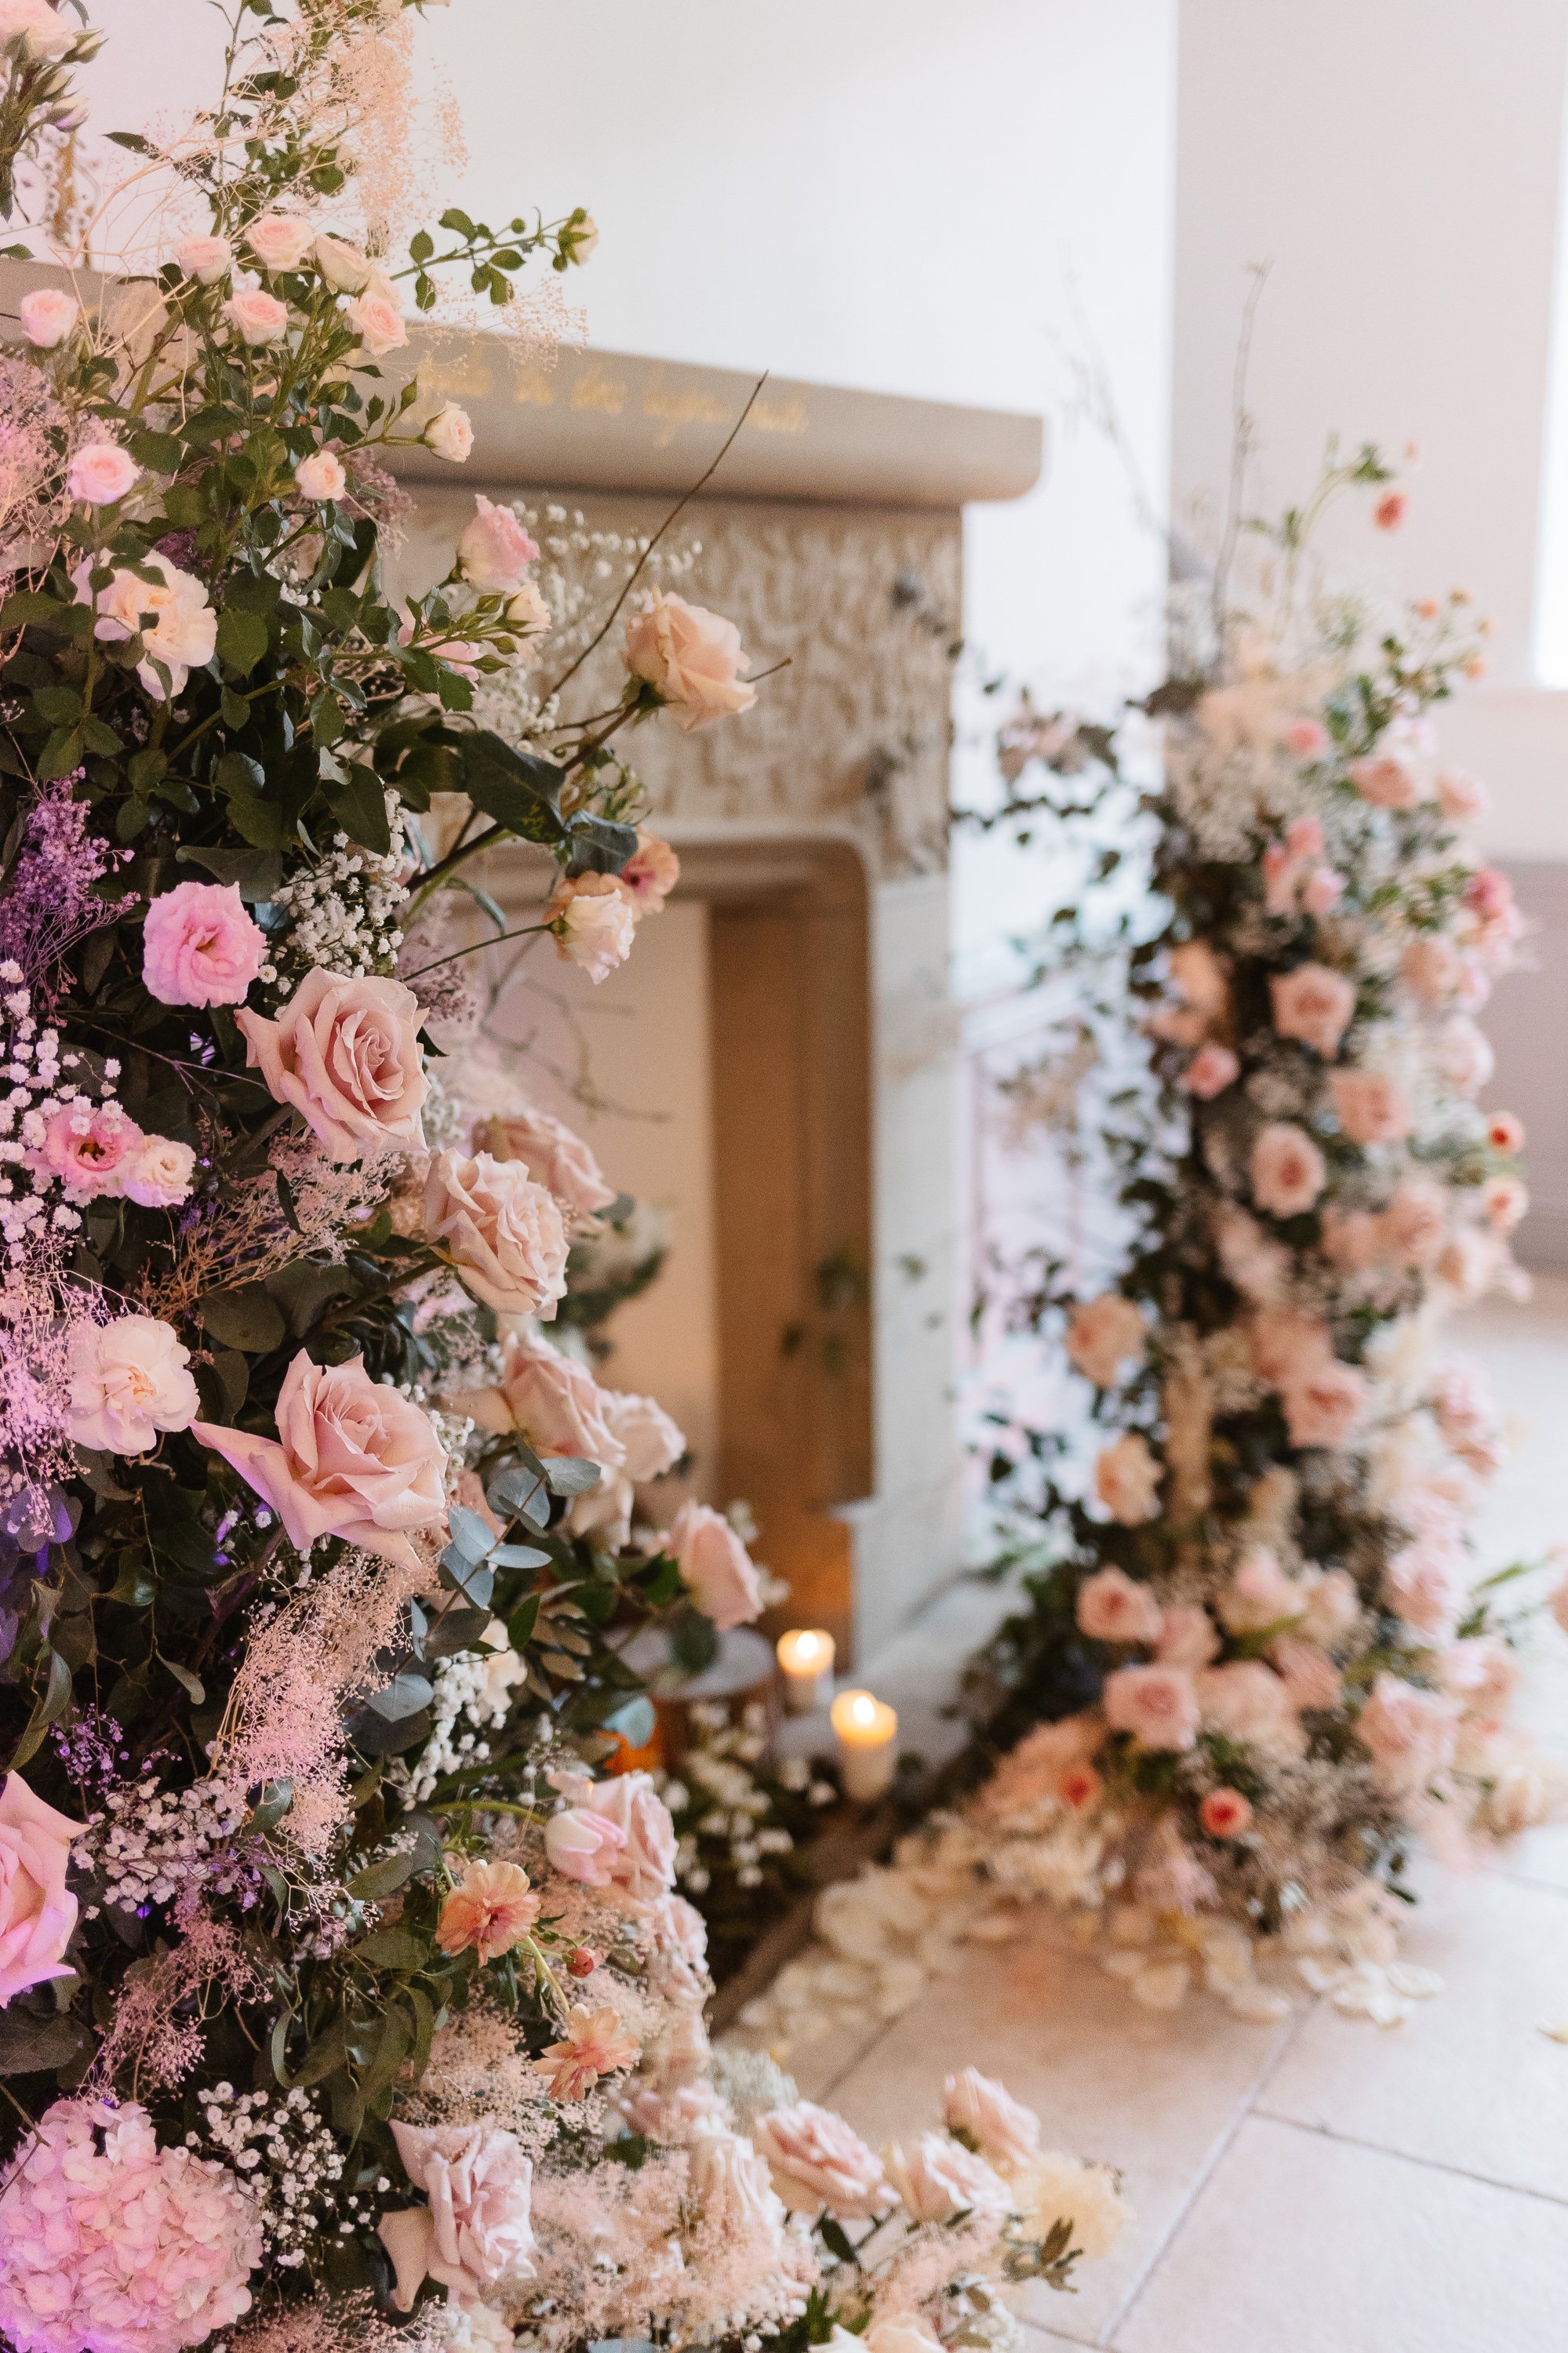 Roses for a wedding ceremony floral backdrop